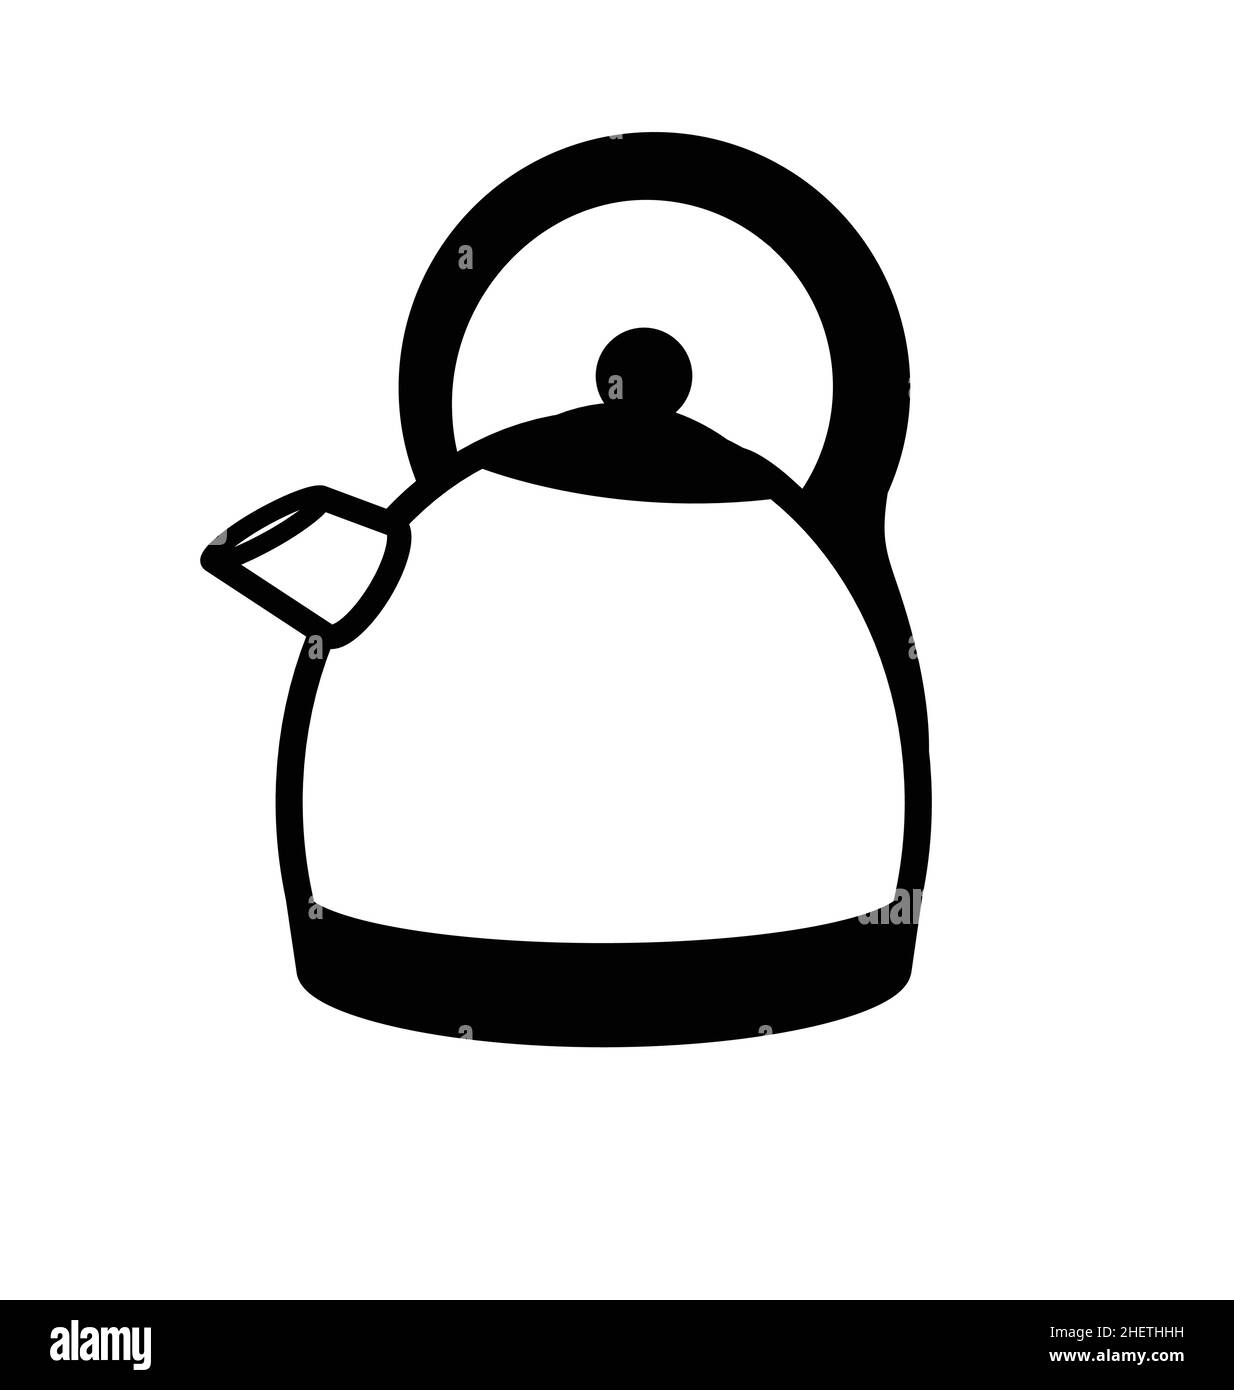 modern kettle black and white cartoon outline illustration icon vector isolated on white background Stock Vector